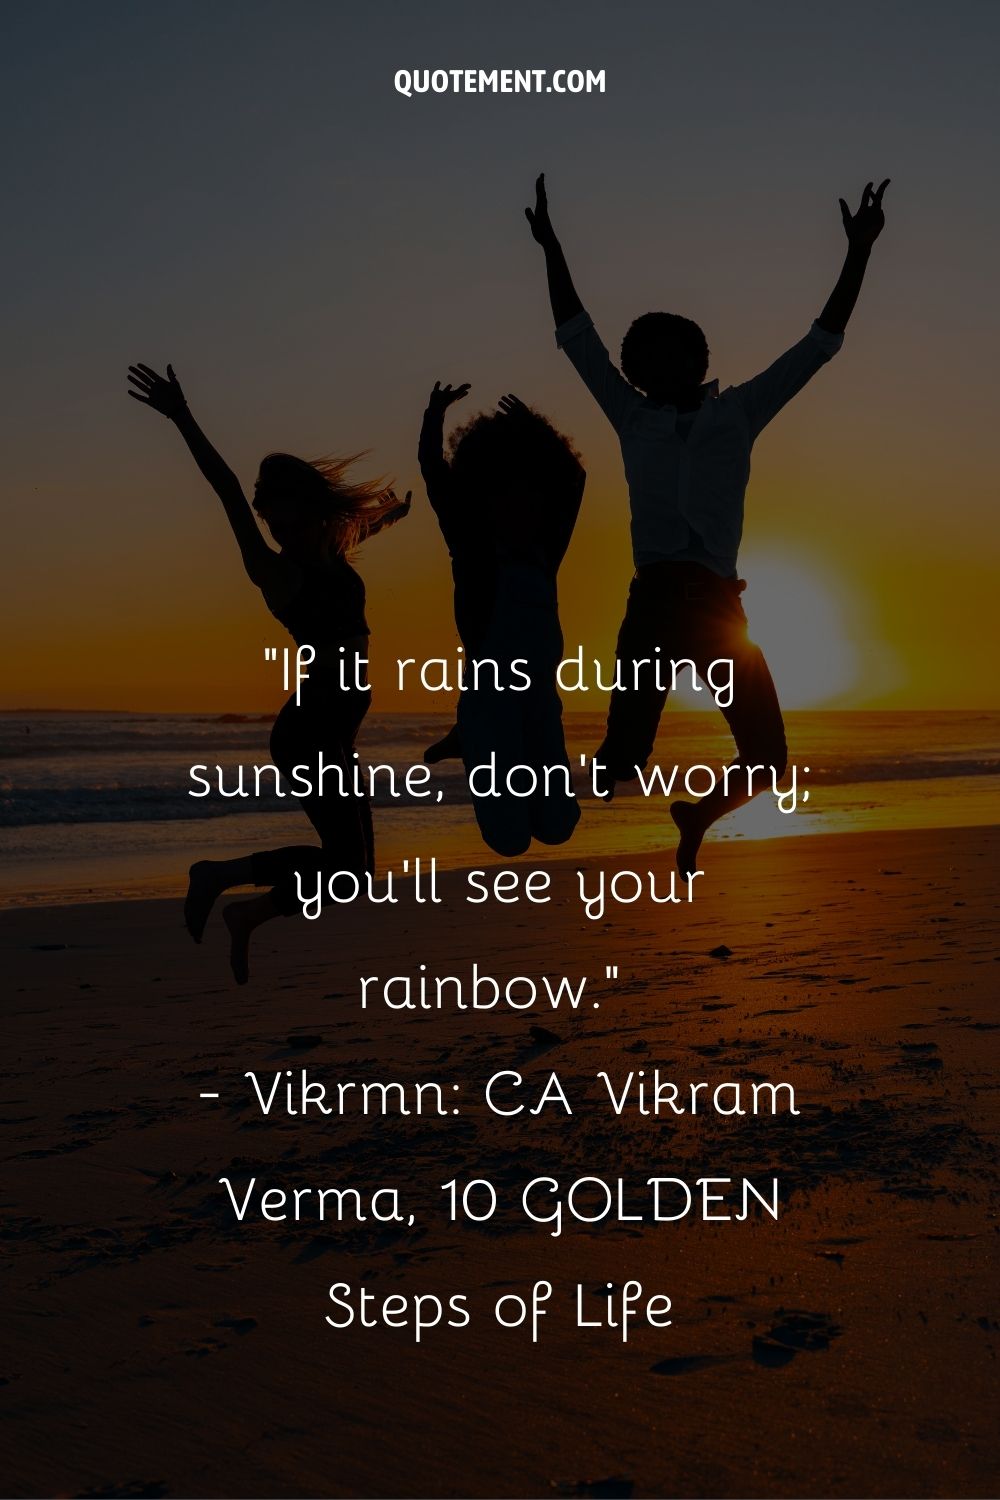 If it rains during sunshine, don’t worry; you’ll see your rainbow